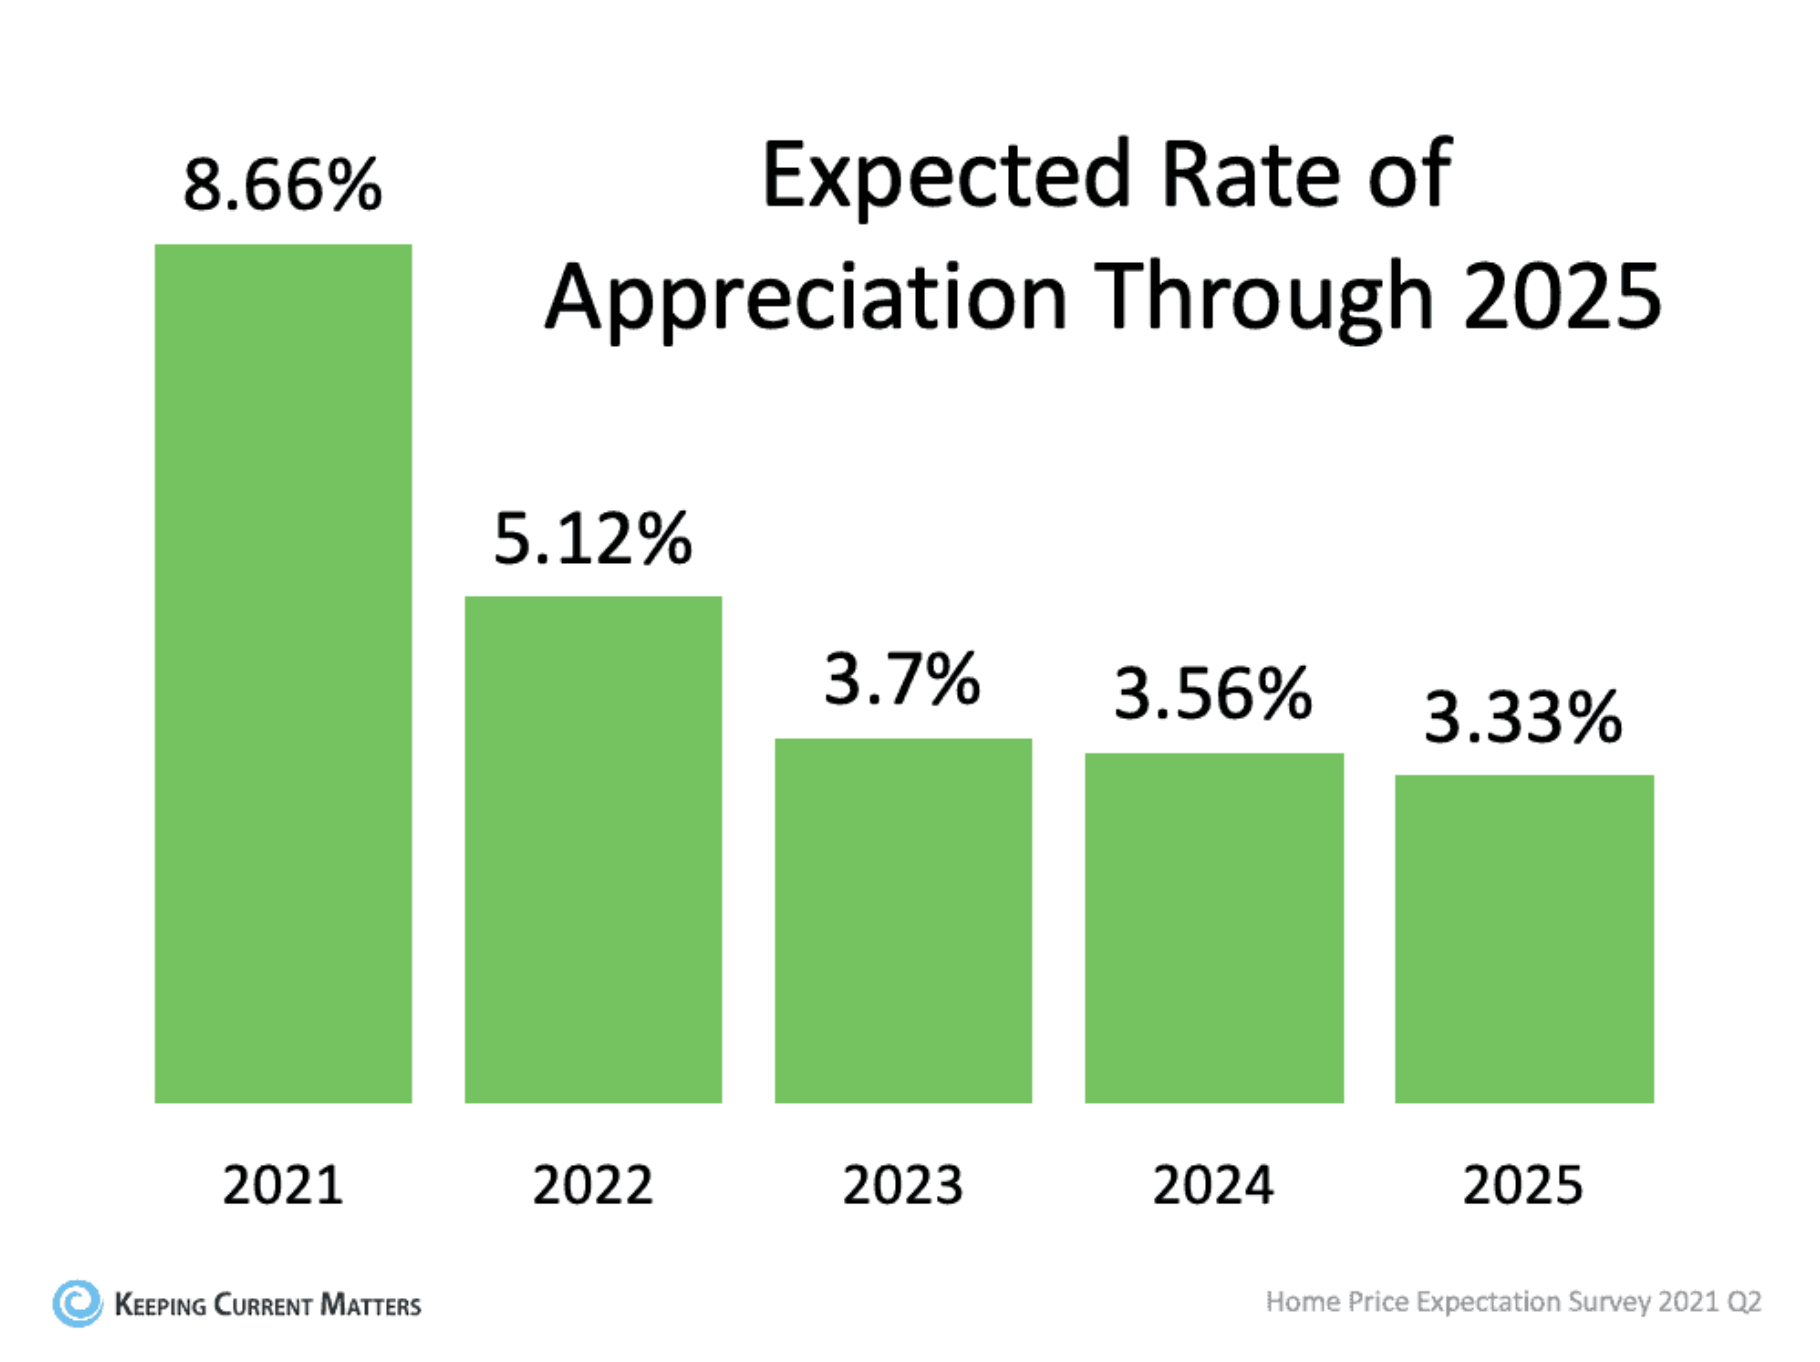 Expected Rate of Housing Appreciation Through 2025